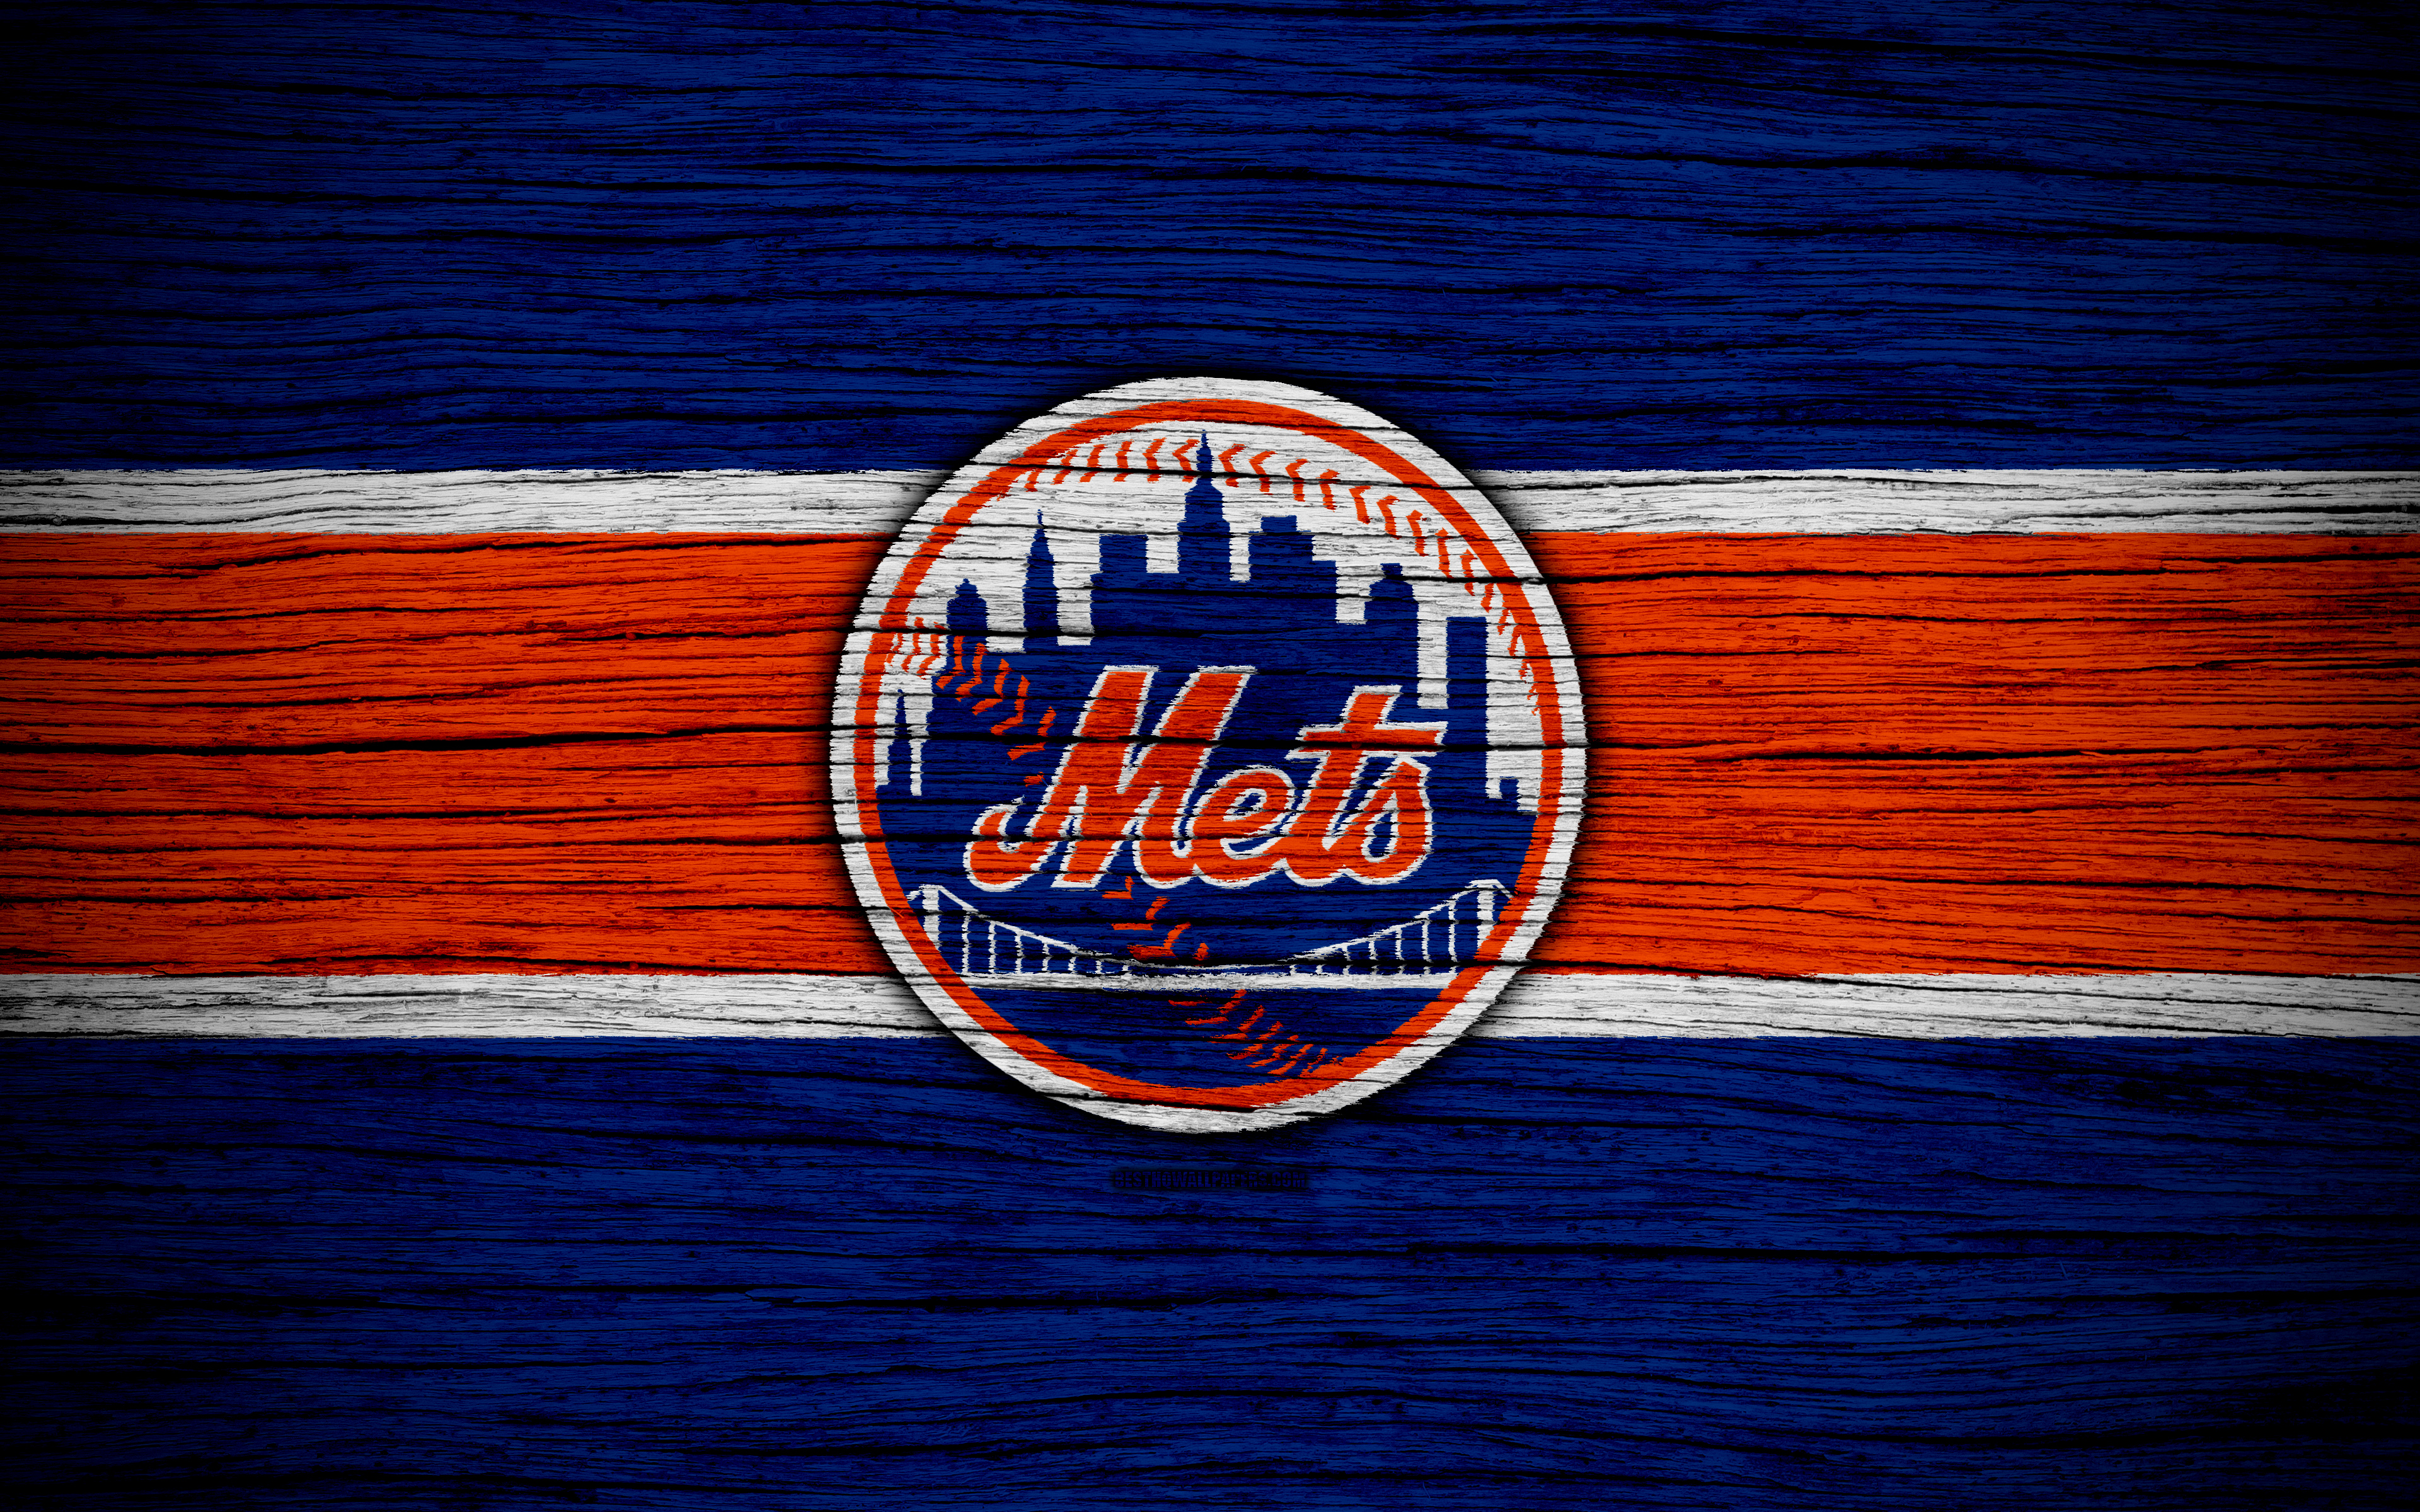 Logos And Uniforms Of The New York Mets - HD Wallpaper 